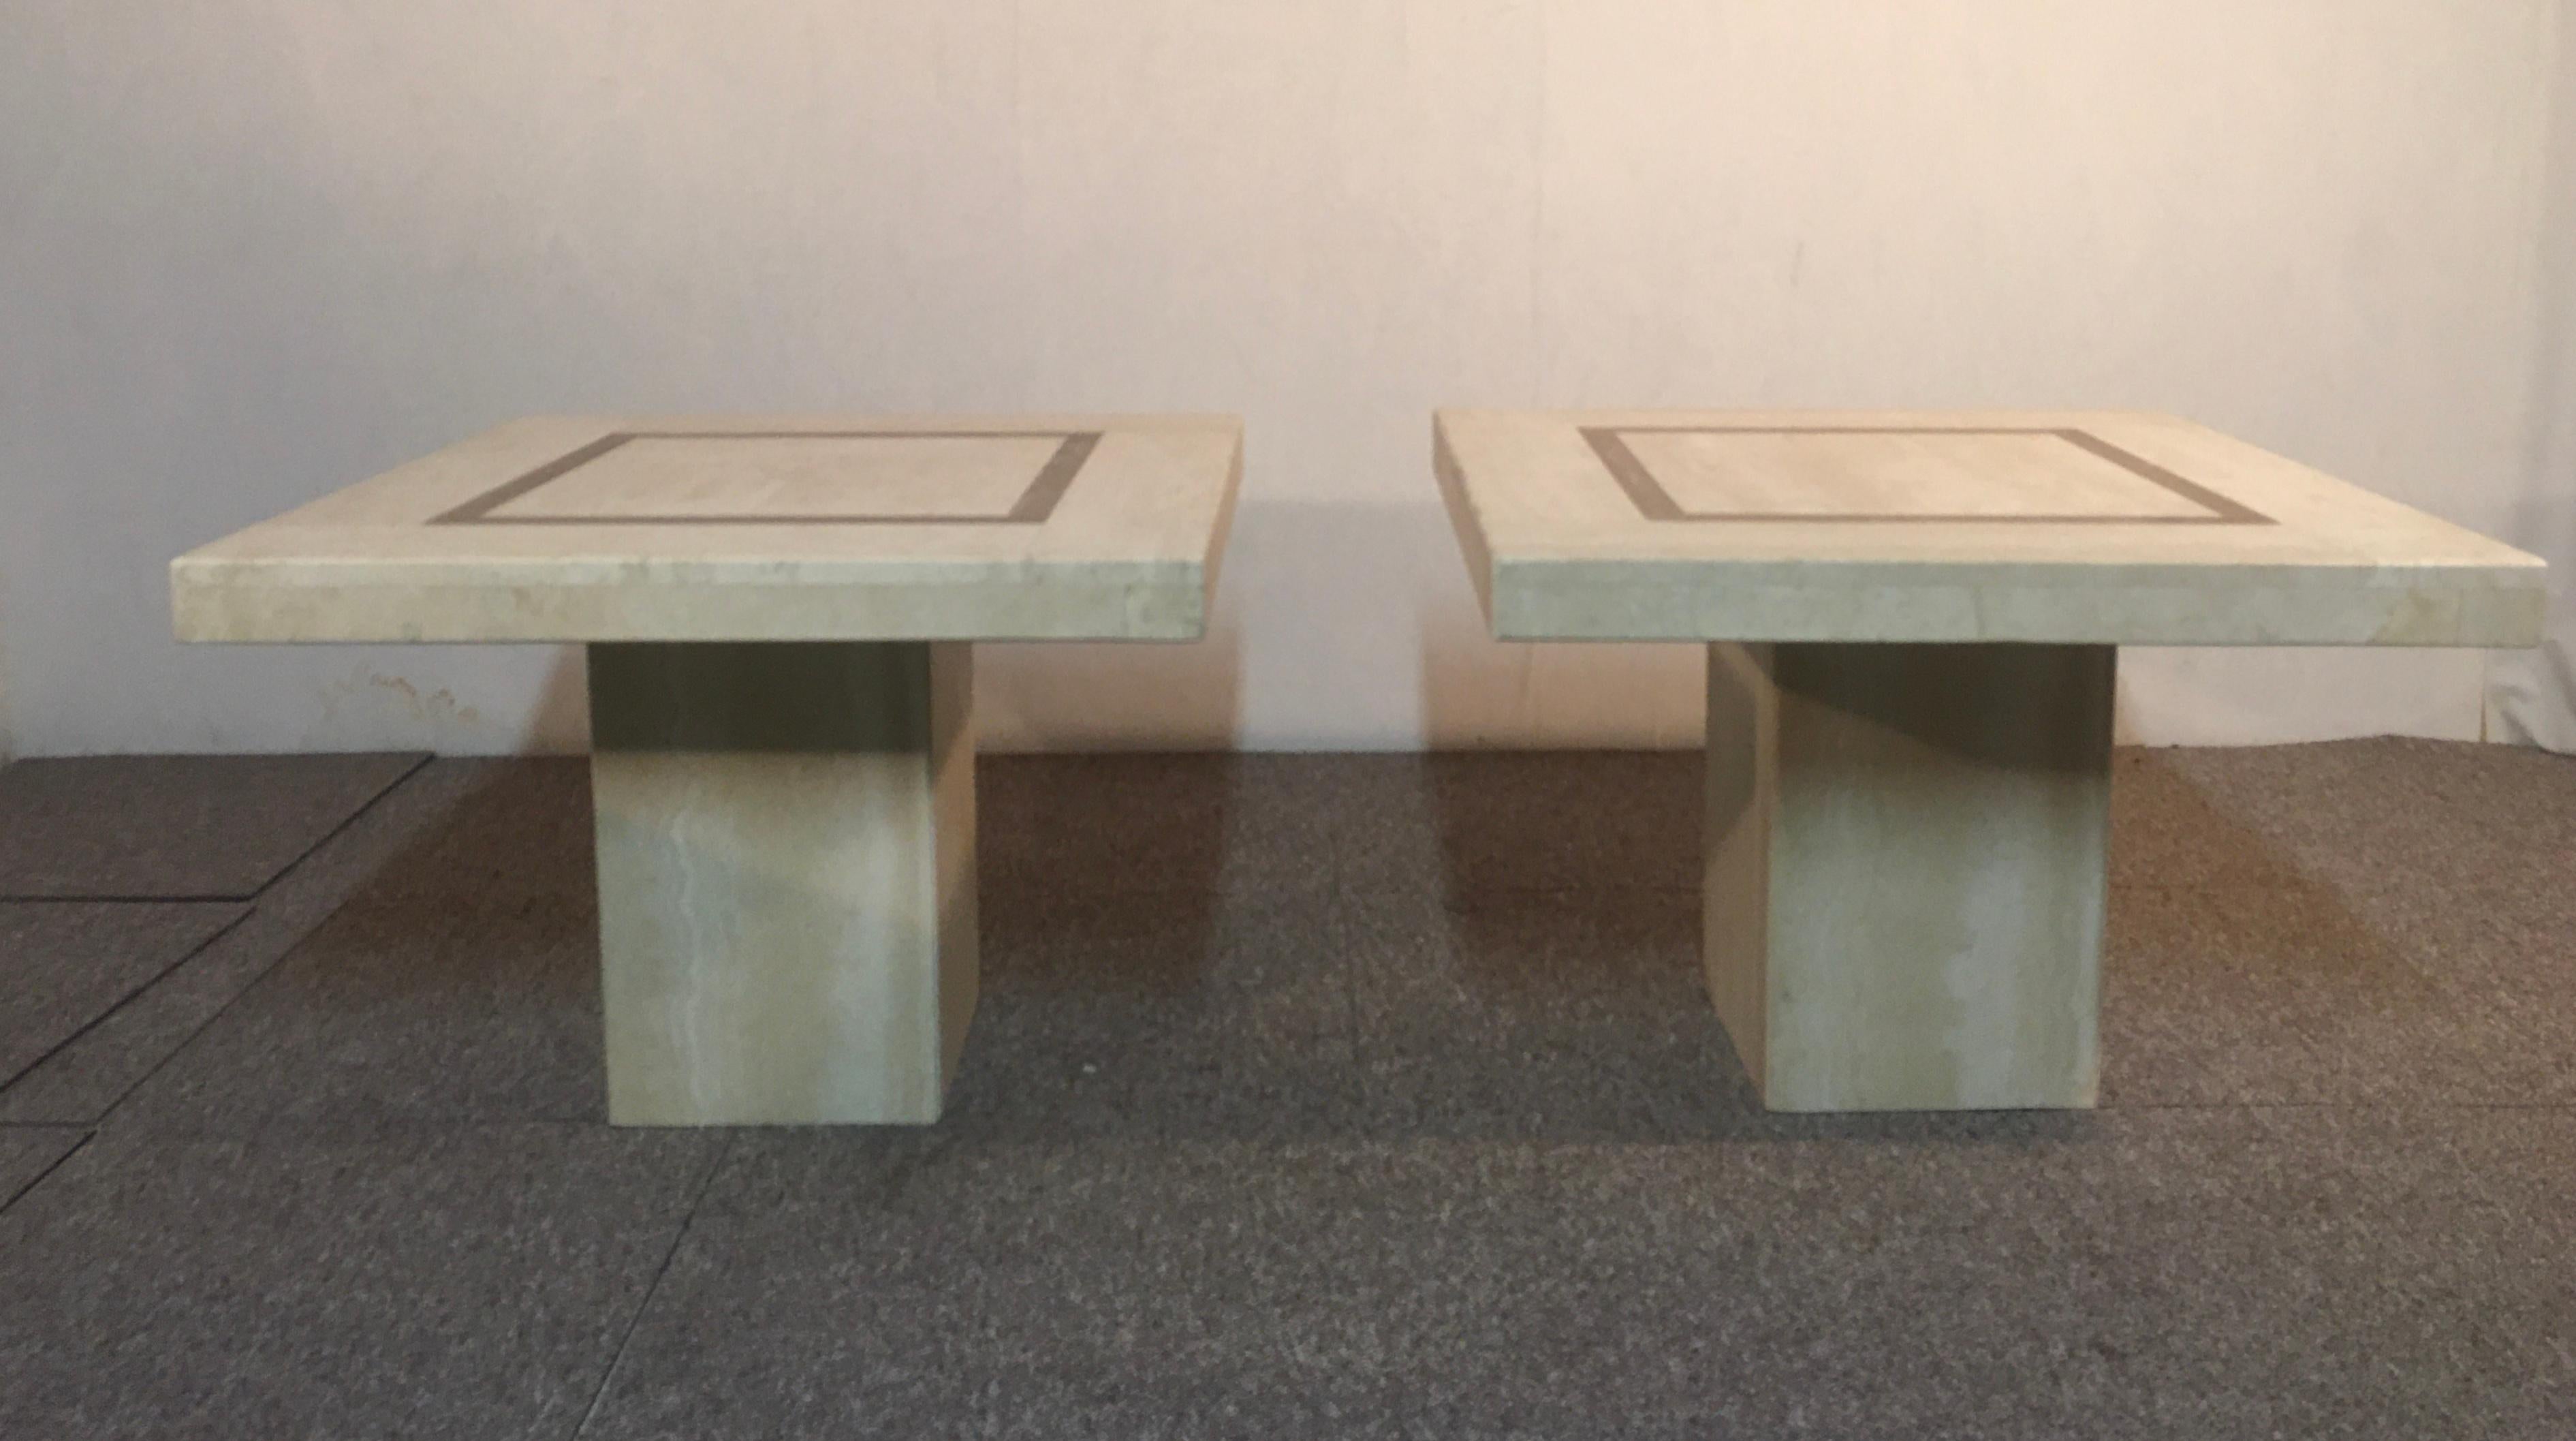 Pair of travertine tables from the 1980s, travertine marquetry with brown stone inlay on the top. The tray is separated from the base for transport. Side tables or side tables. Beautiful marble work.